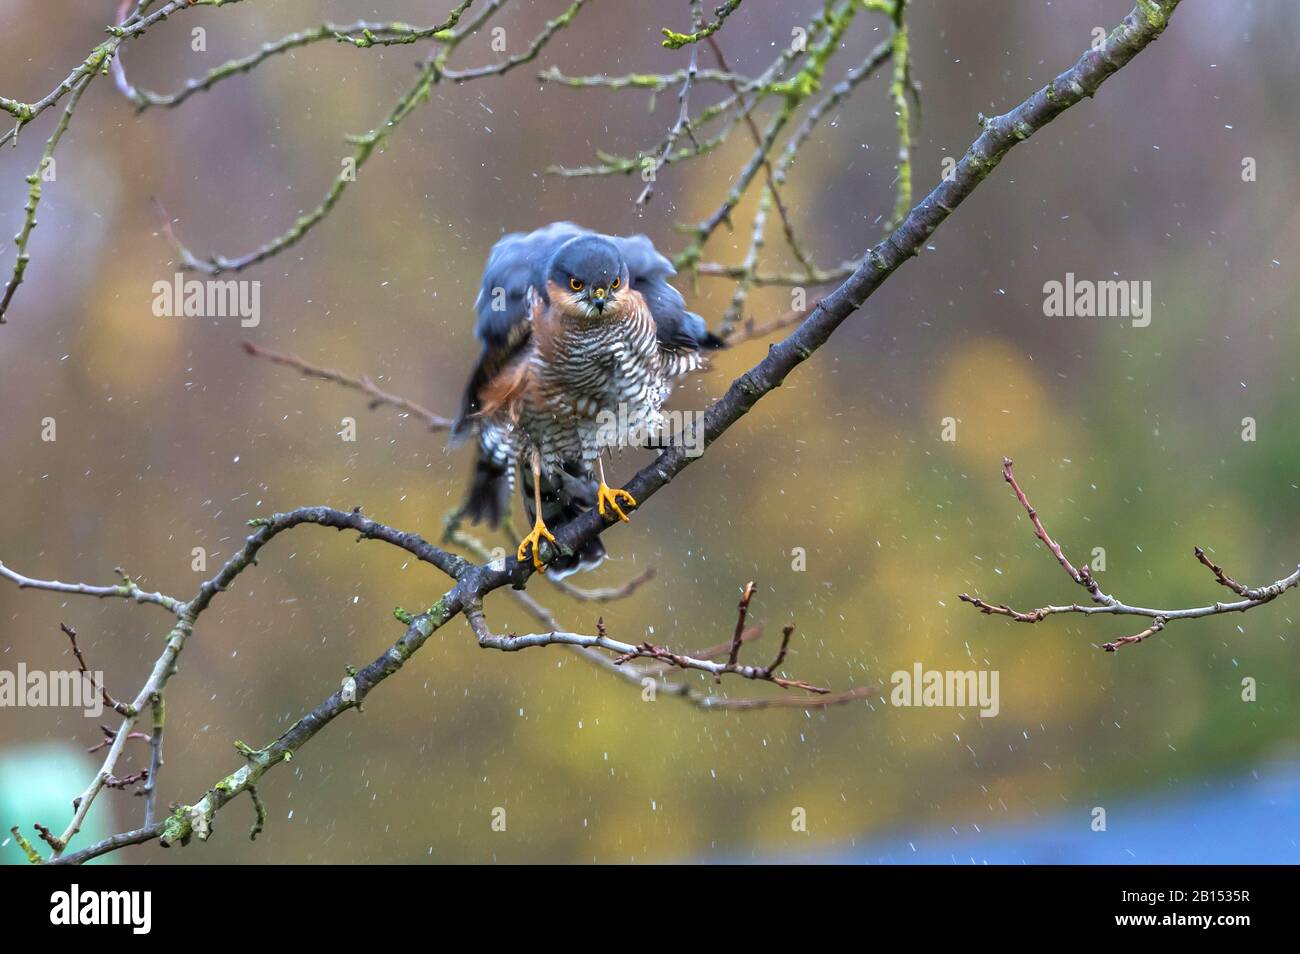 northern sparrow hawk (Accipiter nisus), male shakes off the water from the plumage, Germany, Mecklenburg-Western Pomerania Stock Photo